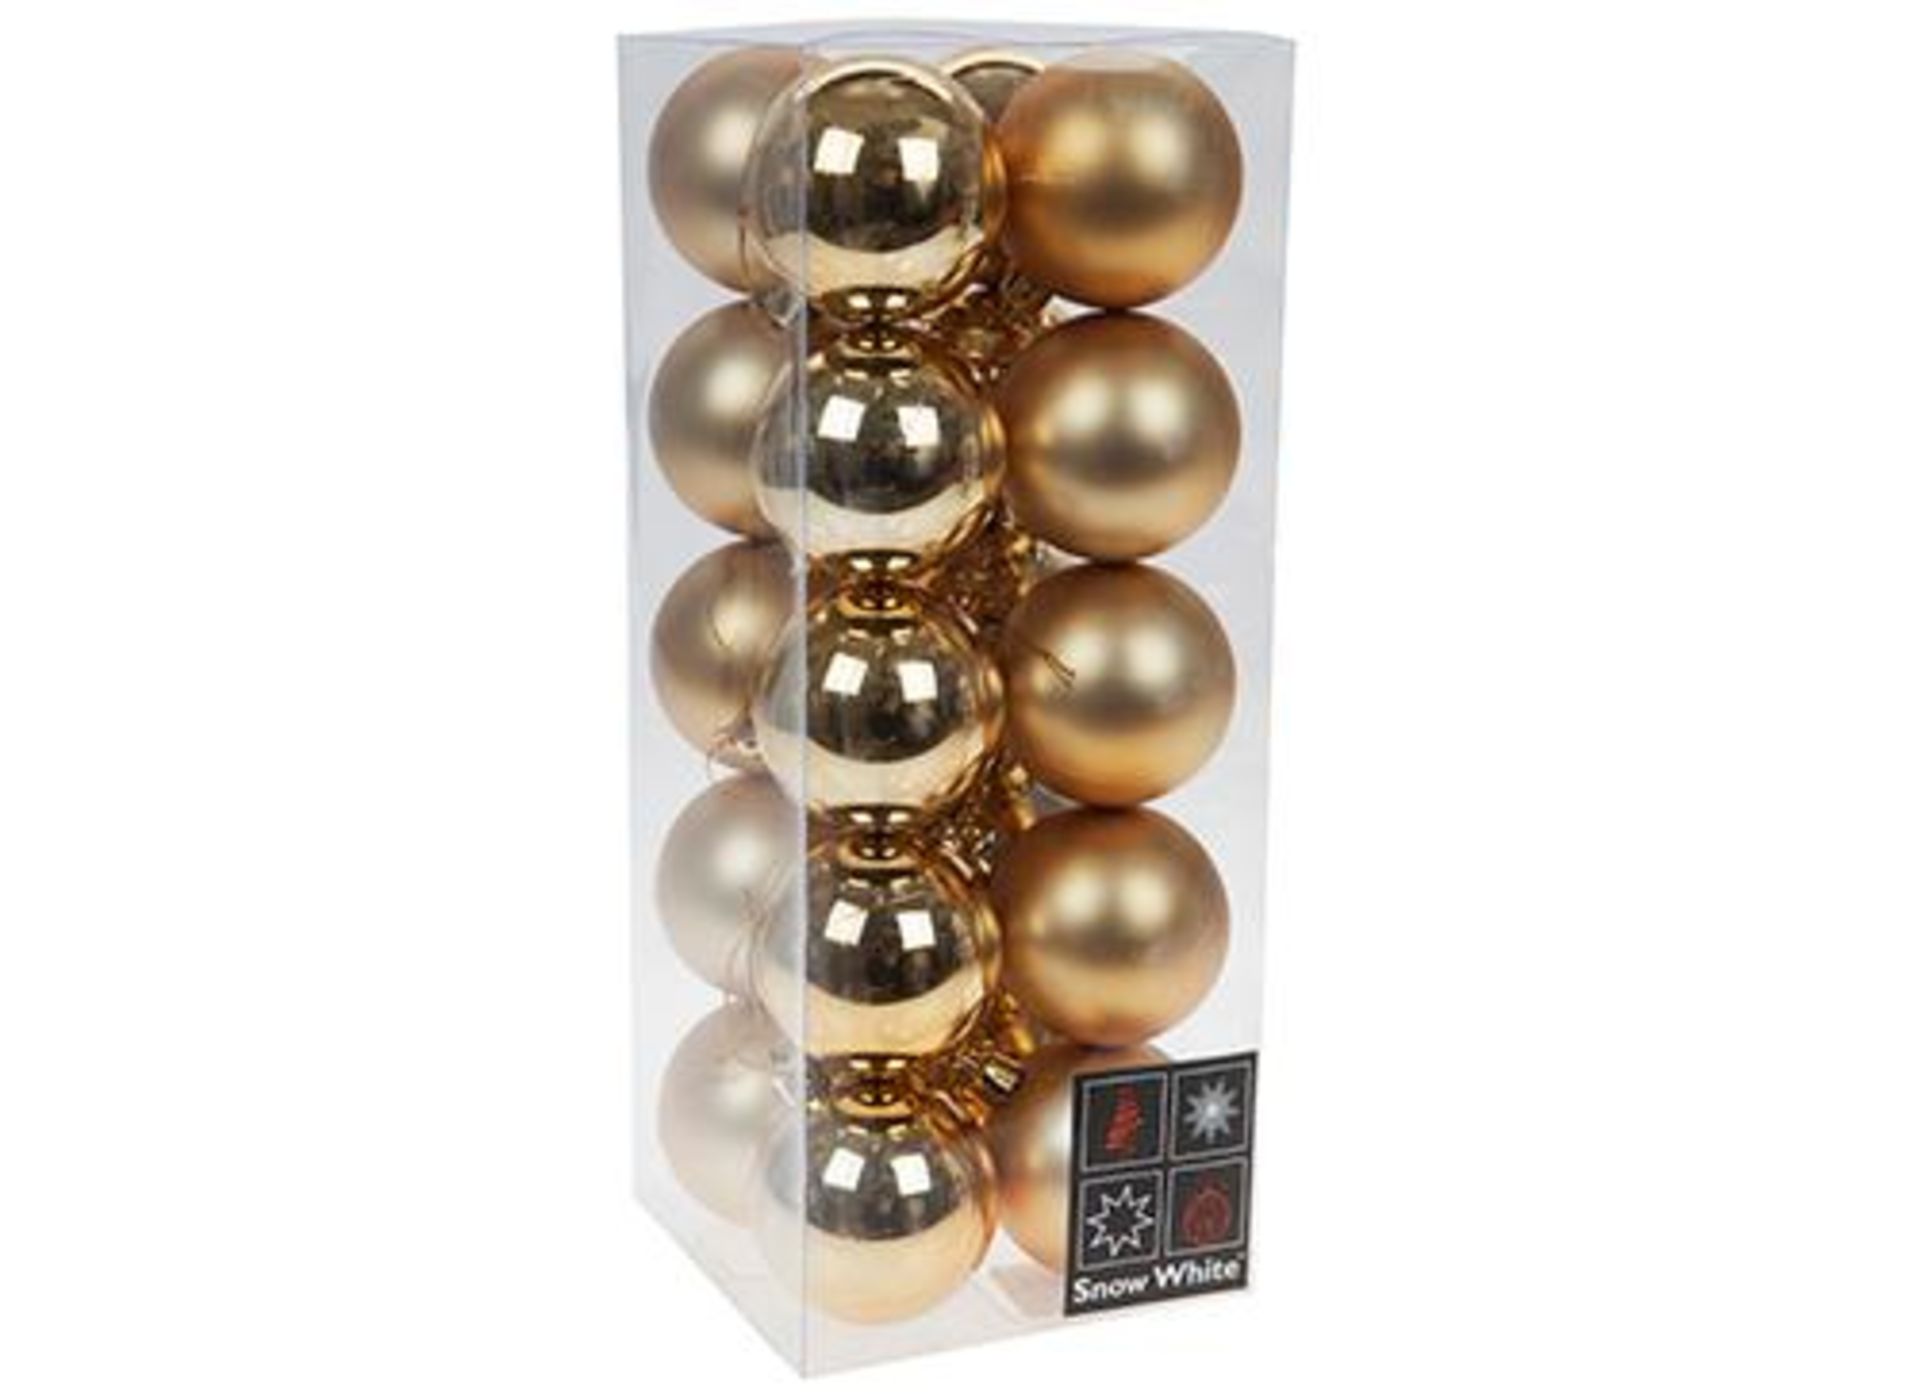 V *TRADE QTY* Brand New Set Of 20 Luxury Christmas Baubles X 3 YOUR BID PRICE TO BE MULTIPLIED BY